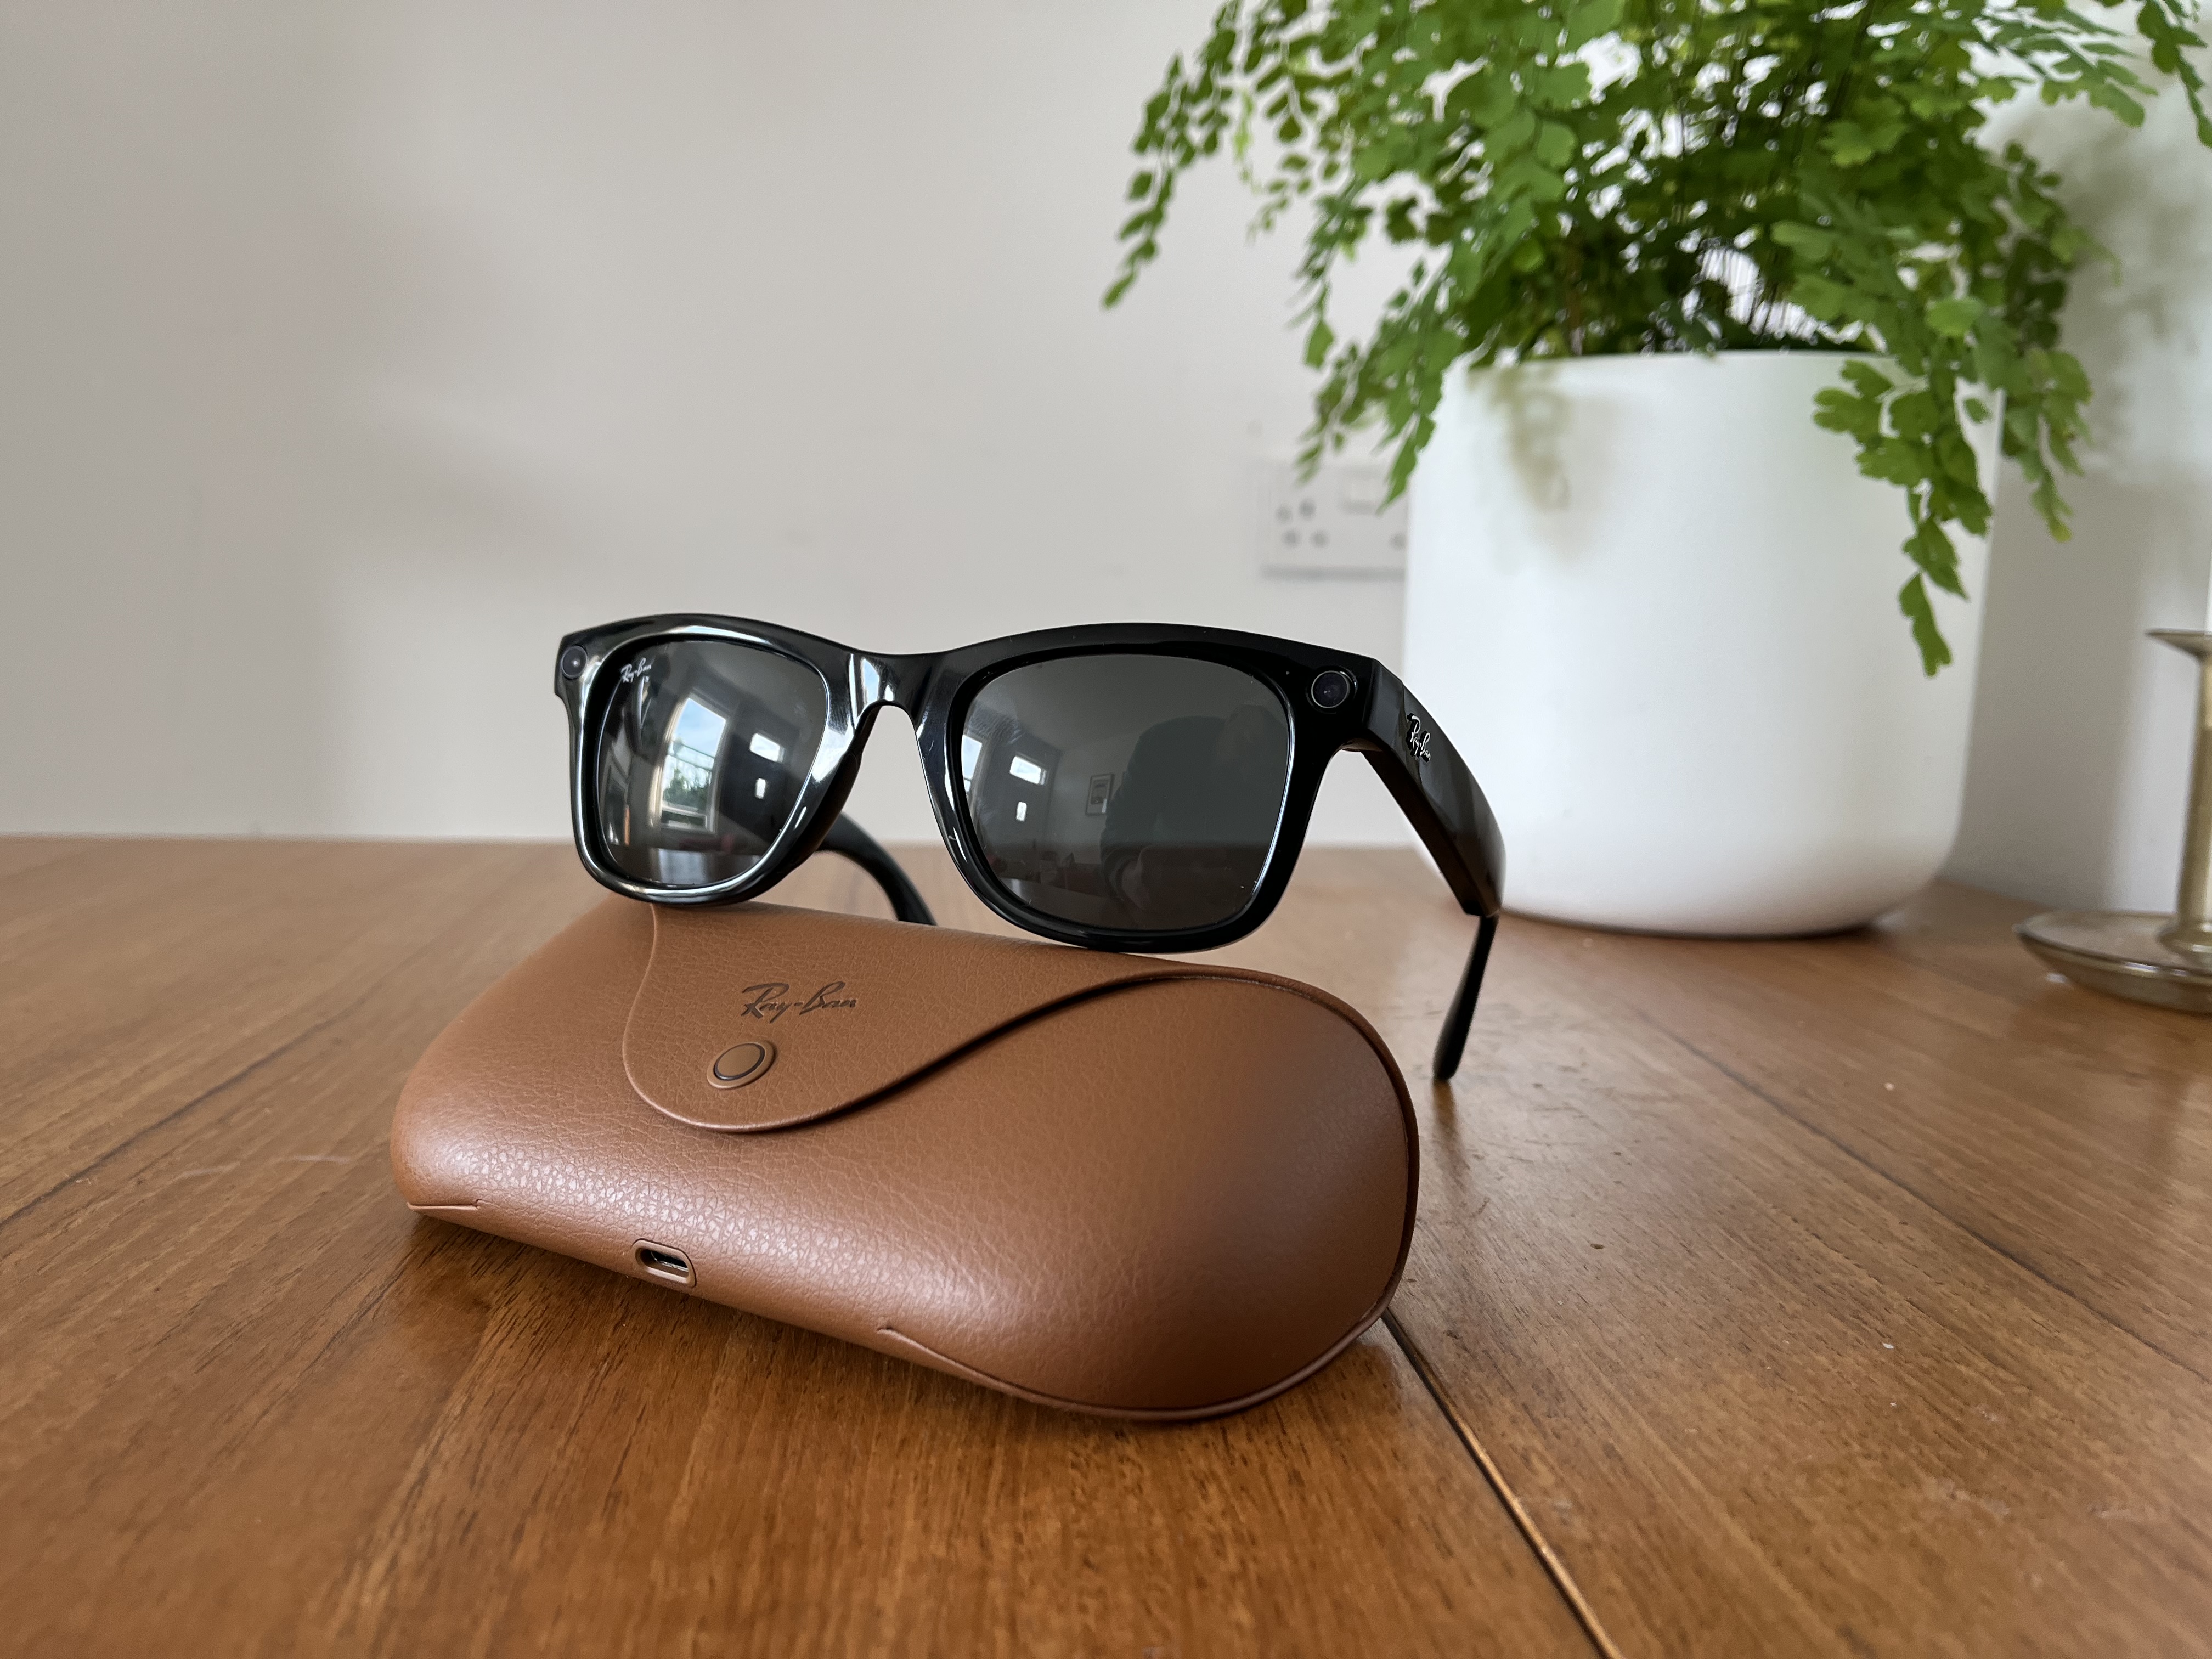 Ray-Ban Meta Smart Glasses review: user-friendly privacy